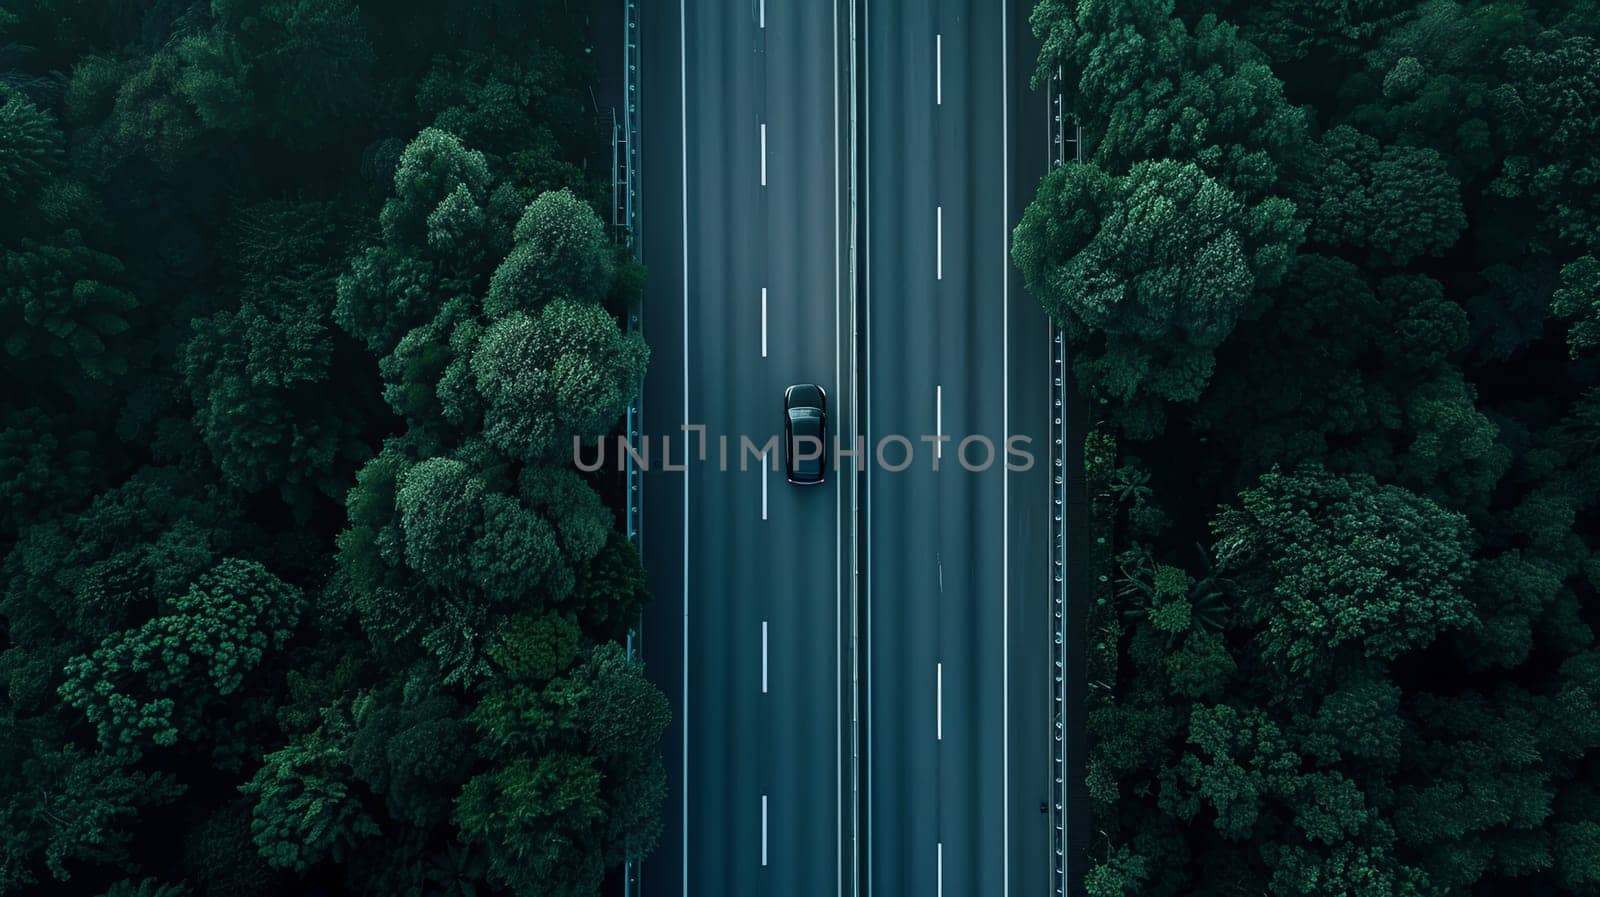 A single car drives on a long highway road through a green forest in an aerial view.